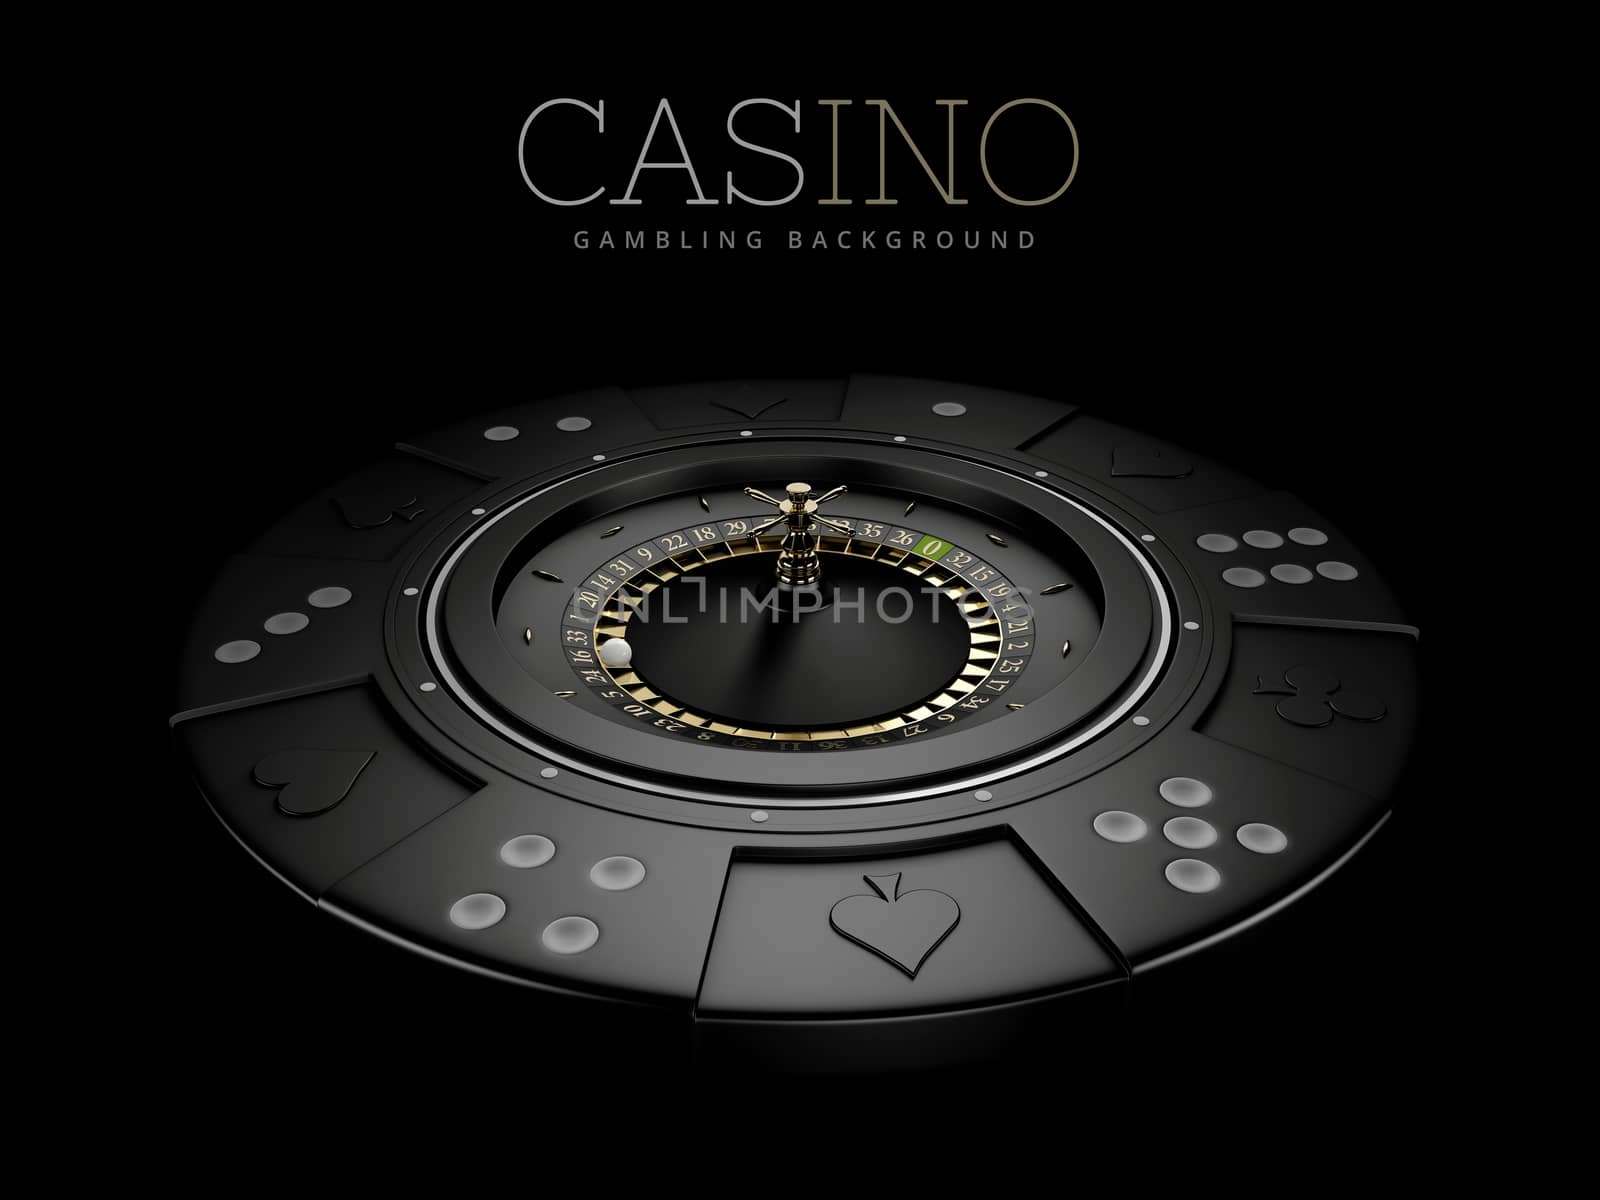 3d rendering of Casino blue chip and roulette. clipping path included